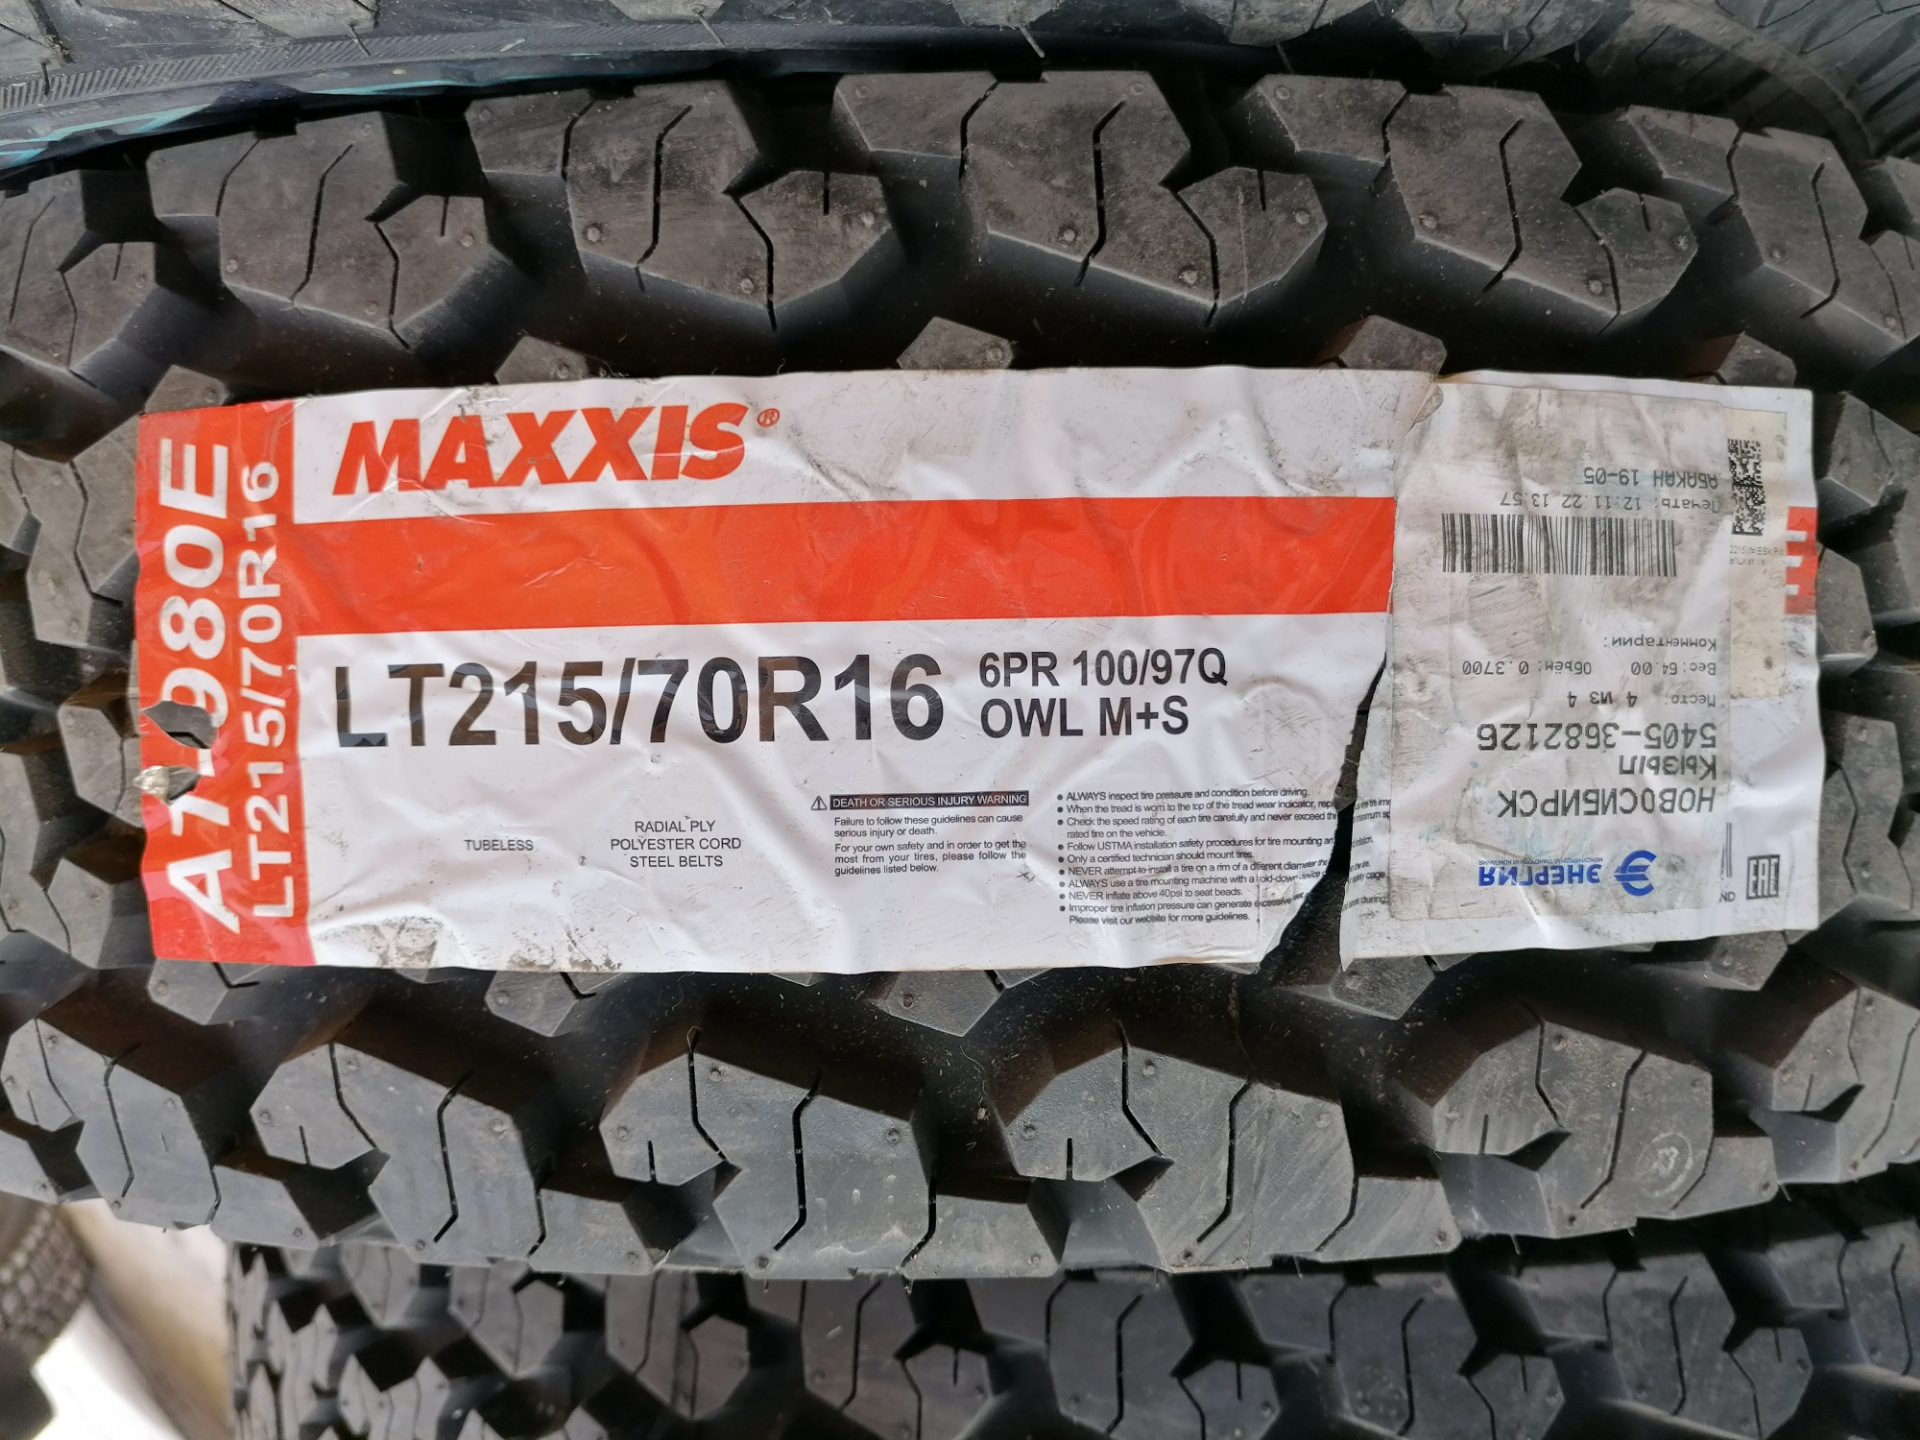 Maxxis отзывы лето. Maxxis at-980e worm-Drive. Maxxis at-980 worm-Drive. Максис АТ 980. Worm Drive 980 Maxxis.